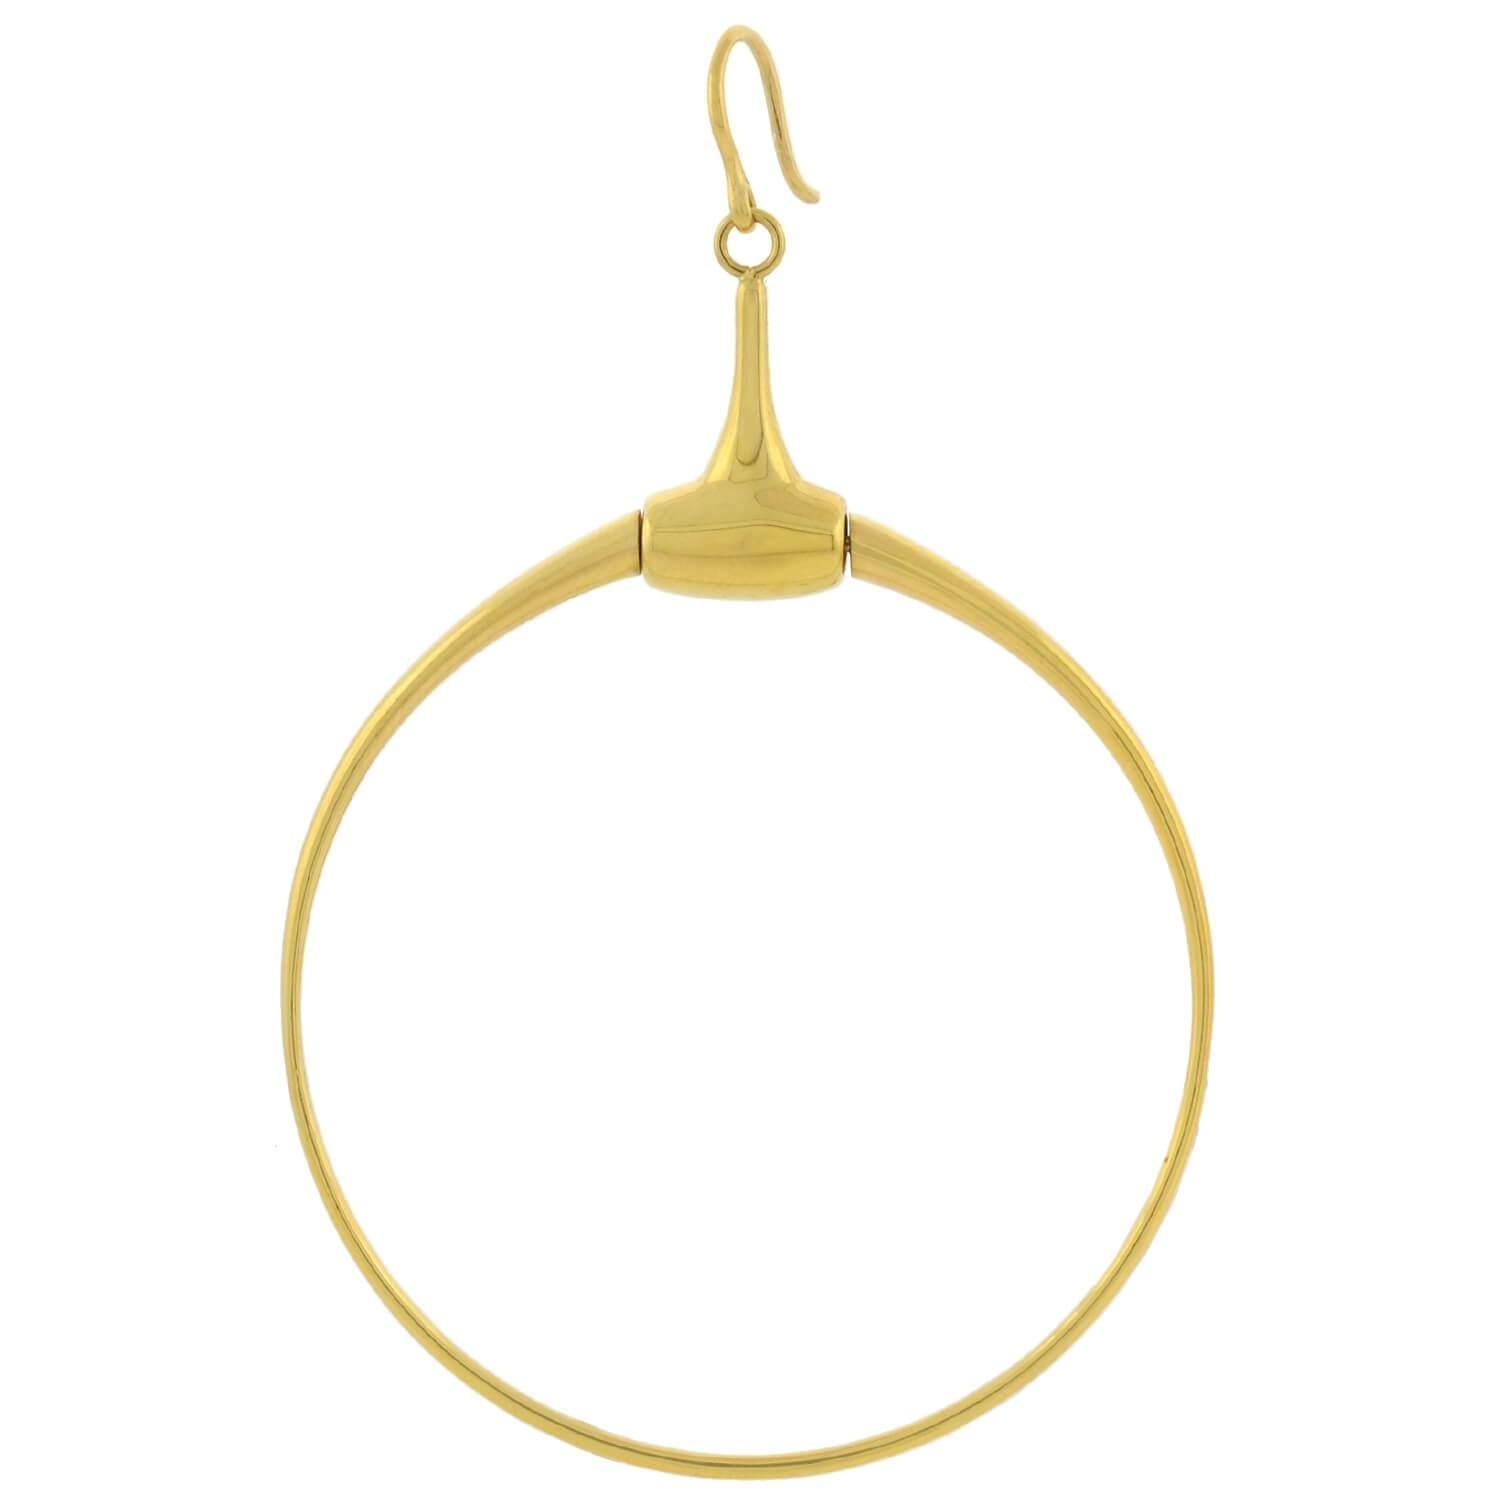 A fabulous pair of Estate horse bit earrings from legendary fashion house Gucci! These stylish earrings are crafted in vibrant 18kt yellow gold and have a wonderful equestrian flair with a wearable everyday appeal. A unique twist on a classic hoop